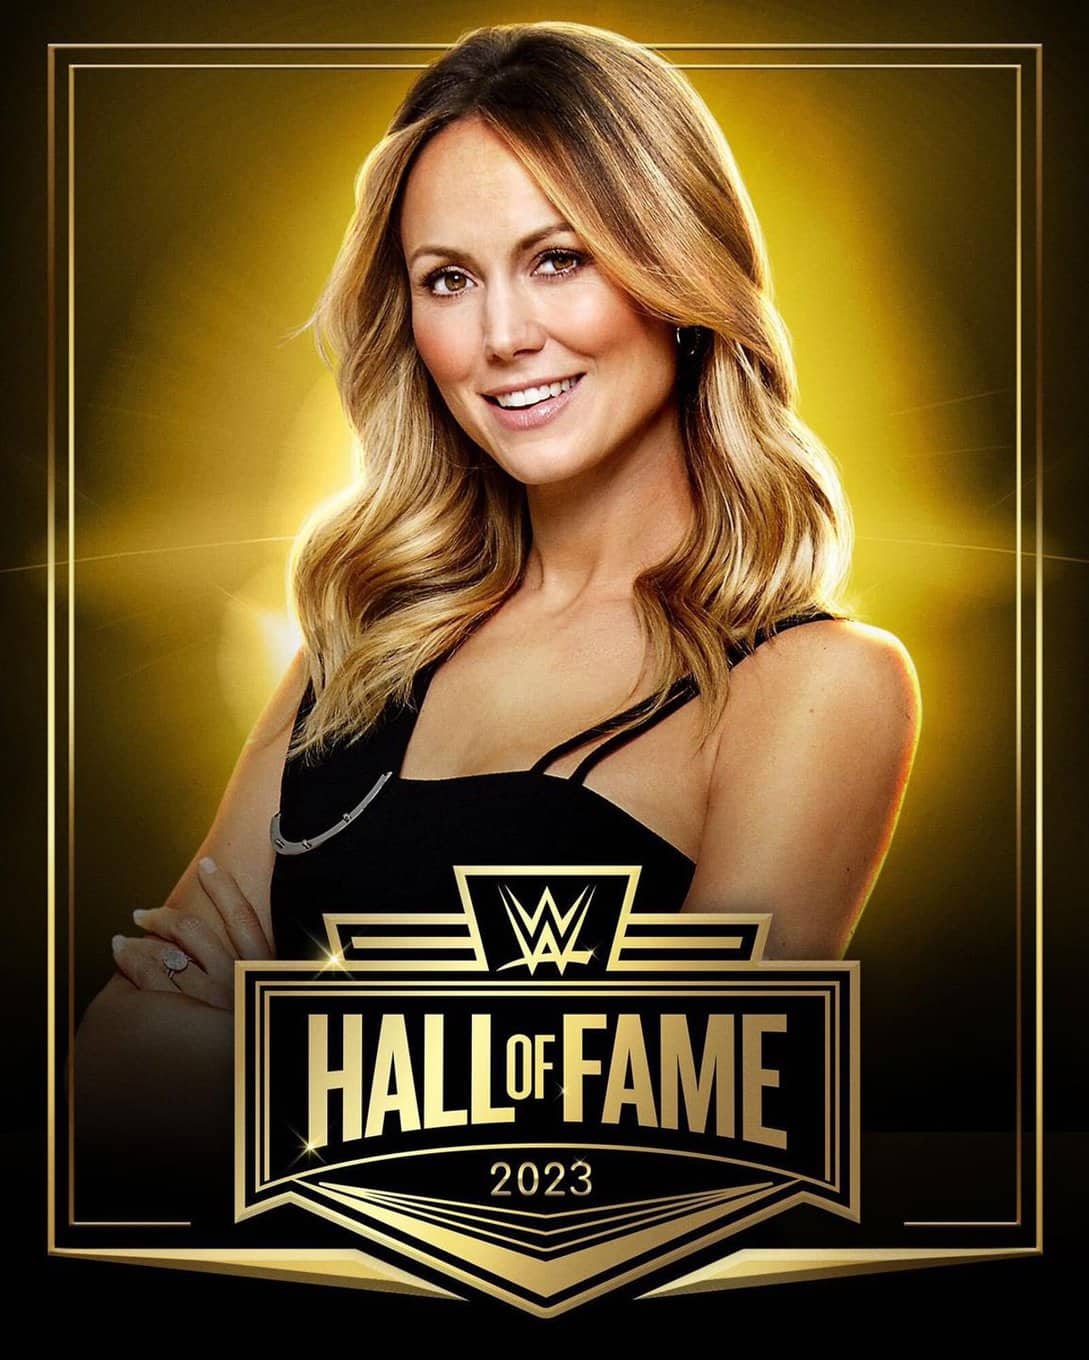 WWE Hall Of Fame Next Inductee Is Stacy Keibler Inside Pulse